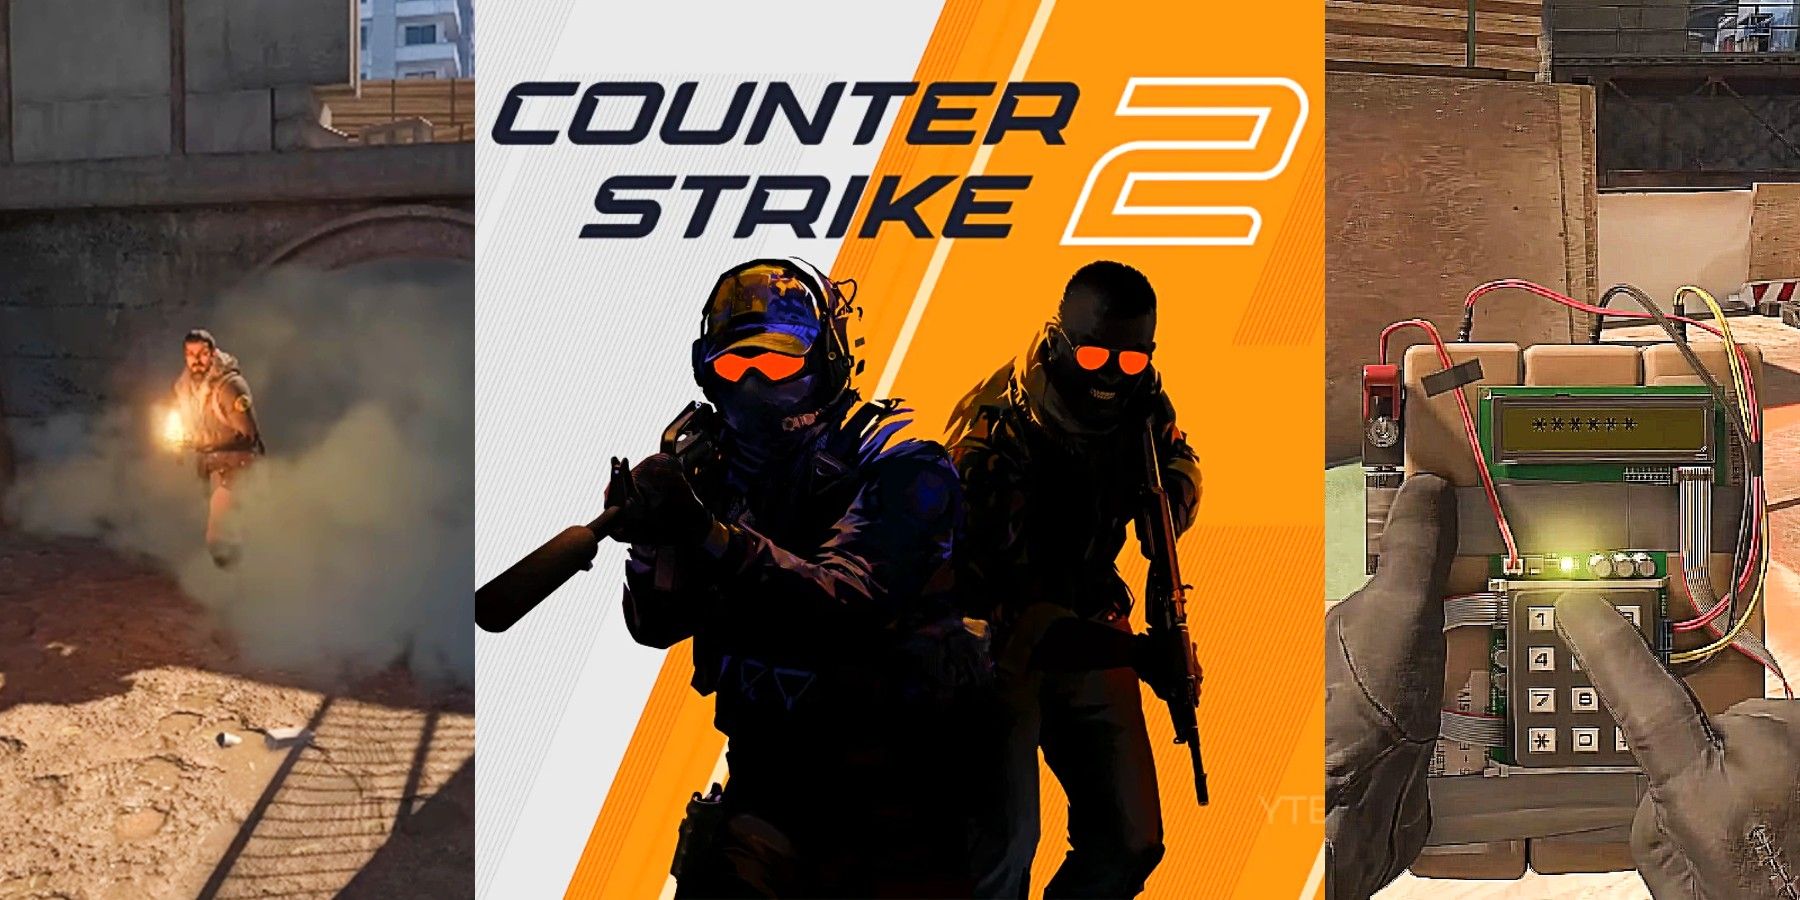 Counter-Strike 2 is coming: Source 2 for CS:GO is almost a reality?